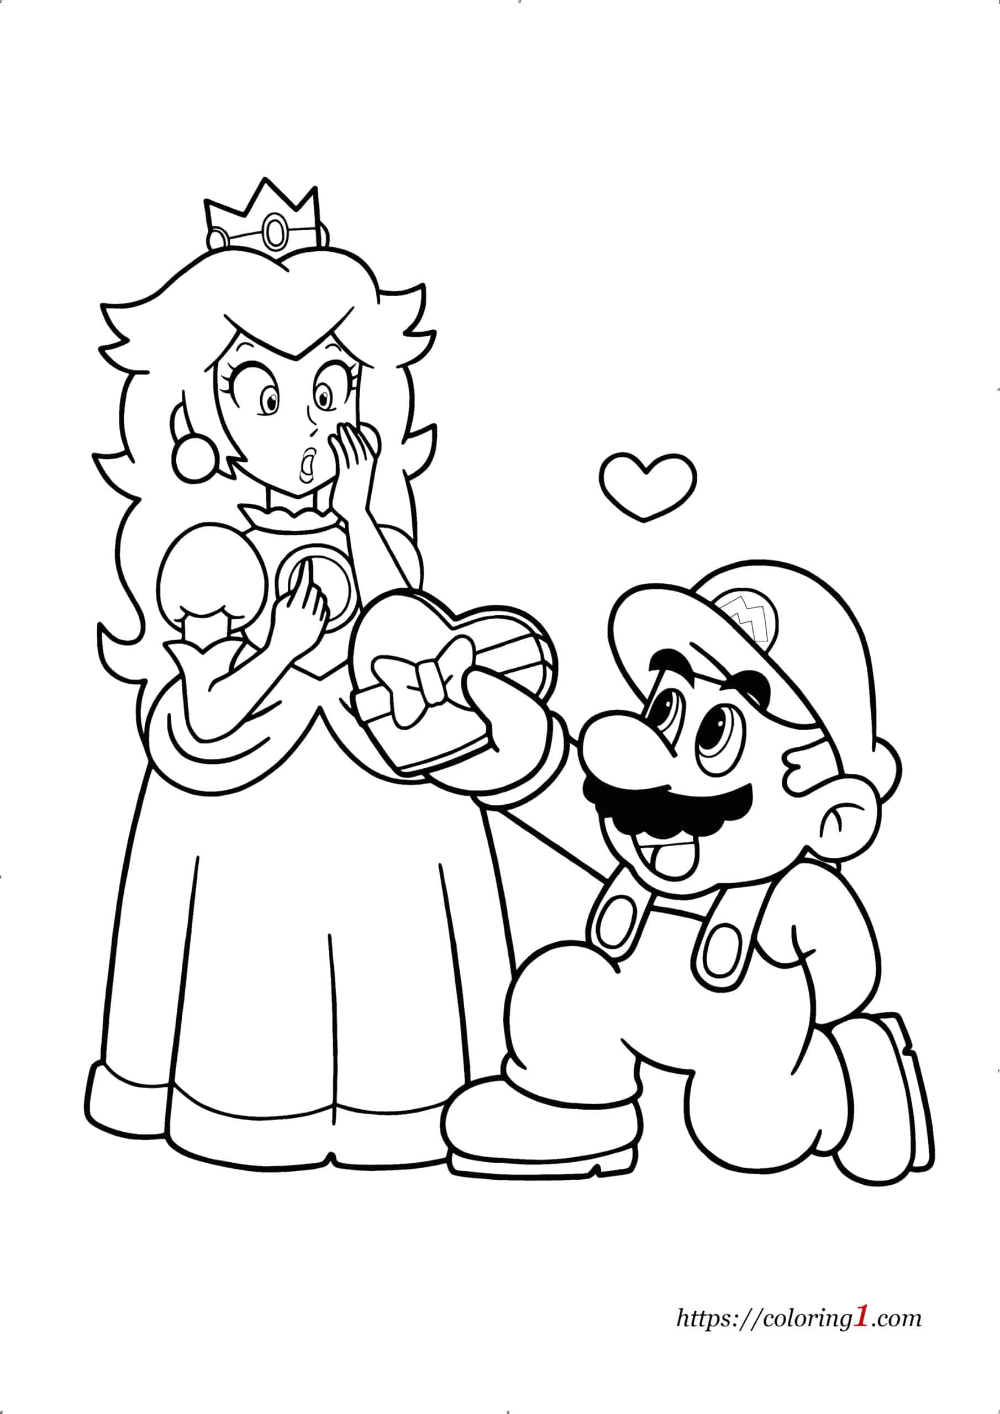 Princess Peach Coloring Pages for Kids 36